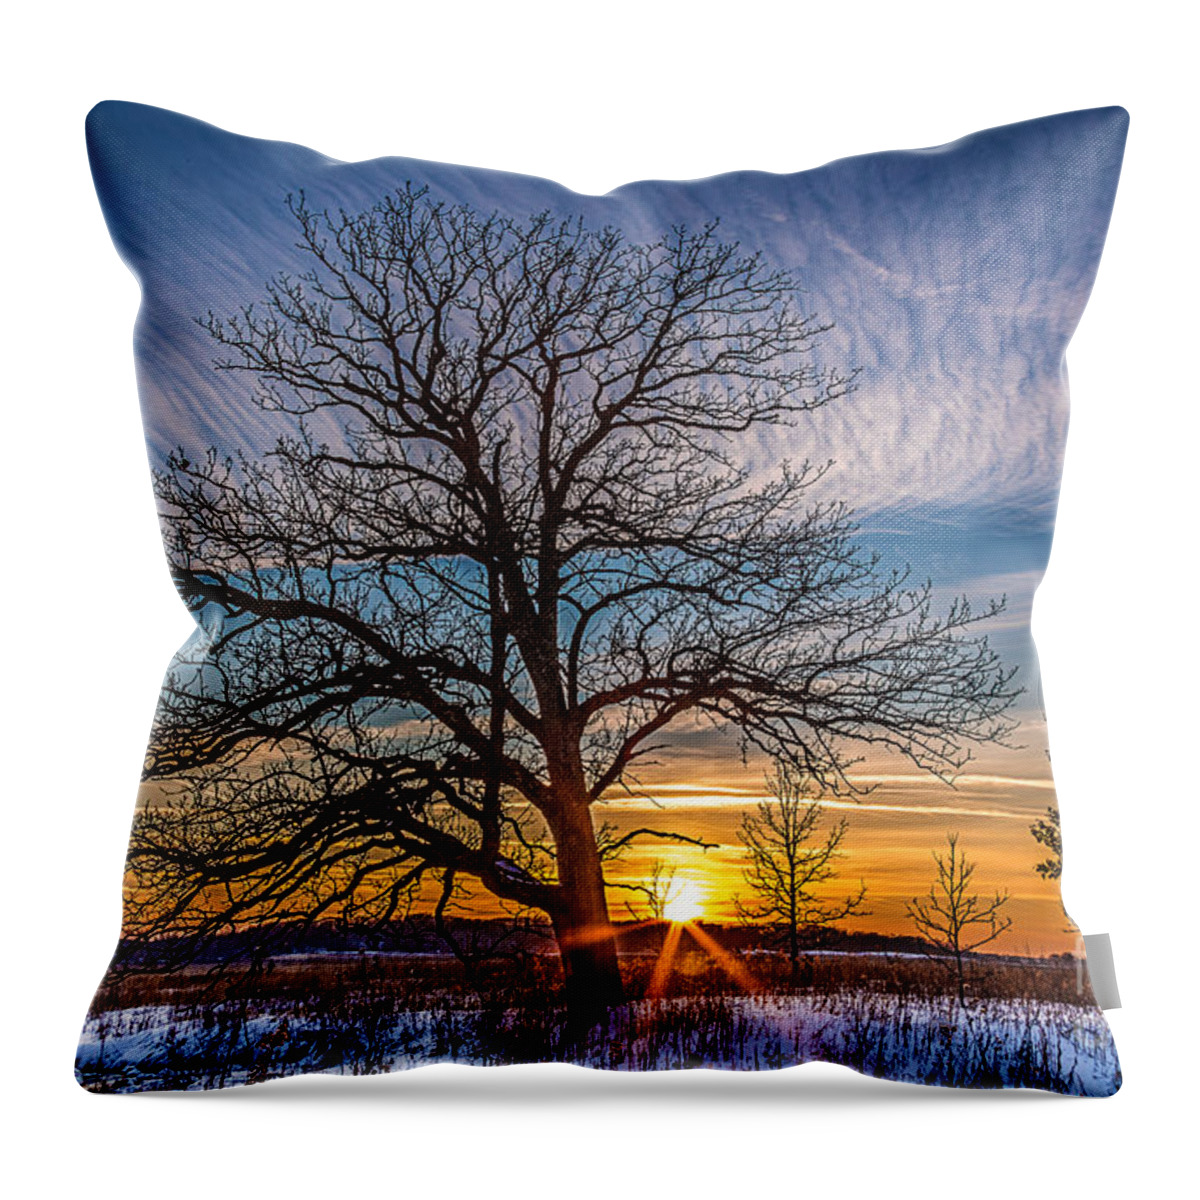 Clouds Throw Pillow featuring the photograph Winter Solace by Andrew Slater